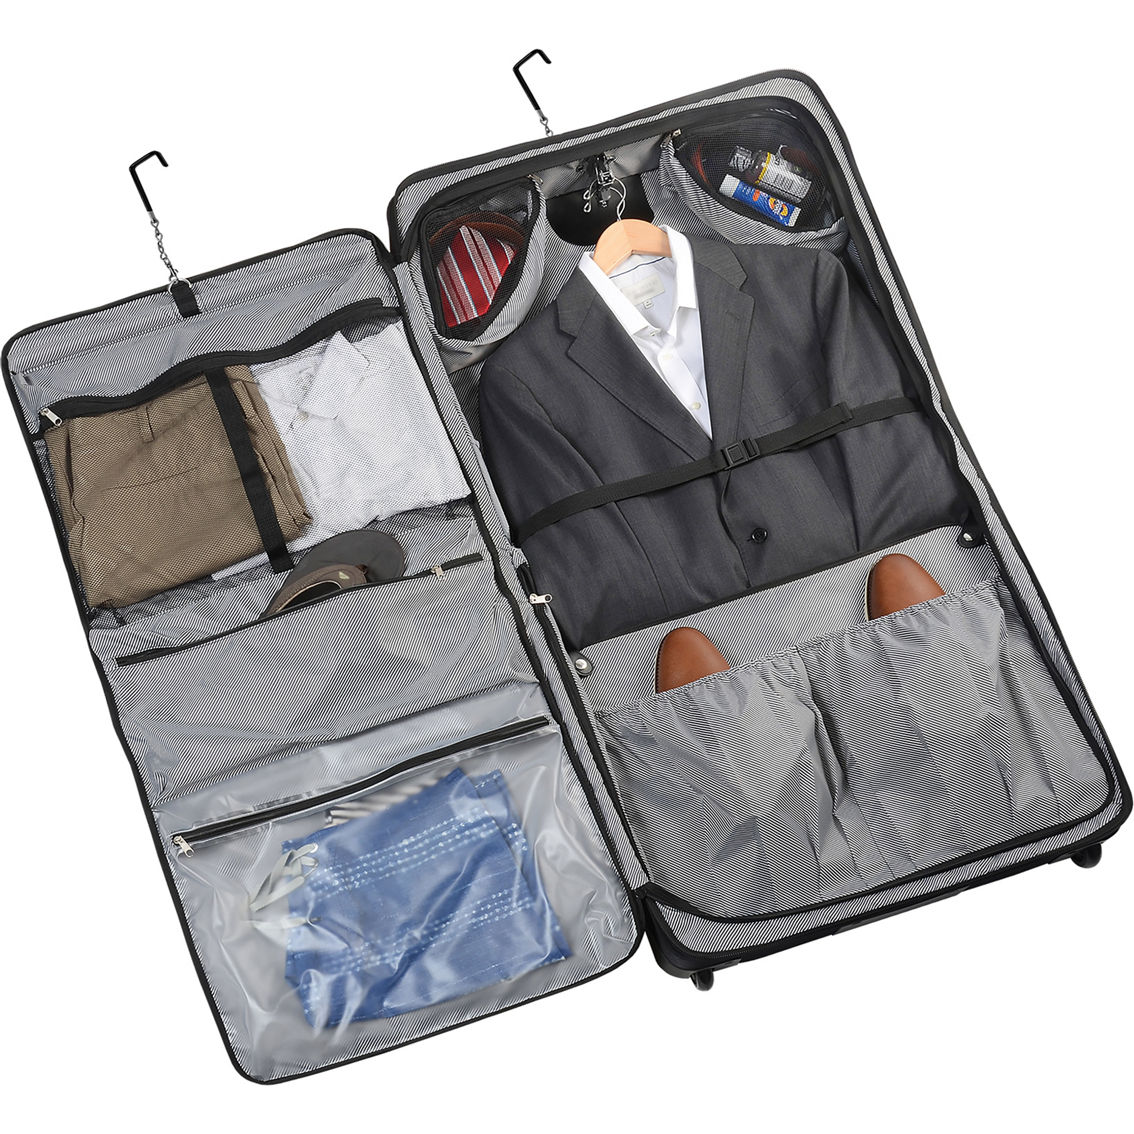 WallyBags 45 in. Premium Rolling Garment Bag with Multiple Pockets - Image 4 of 6